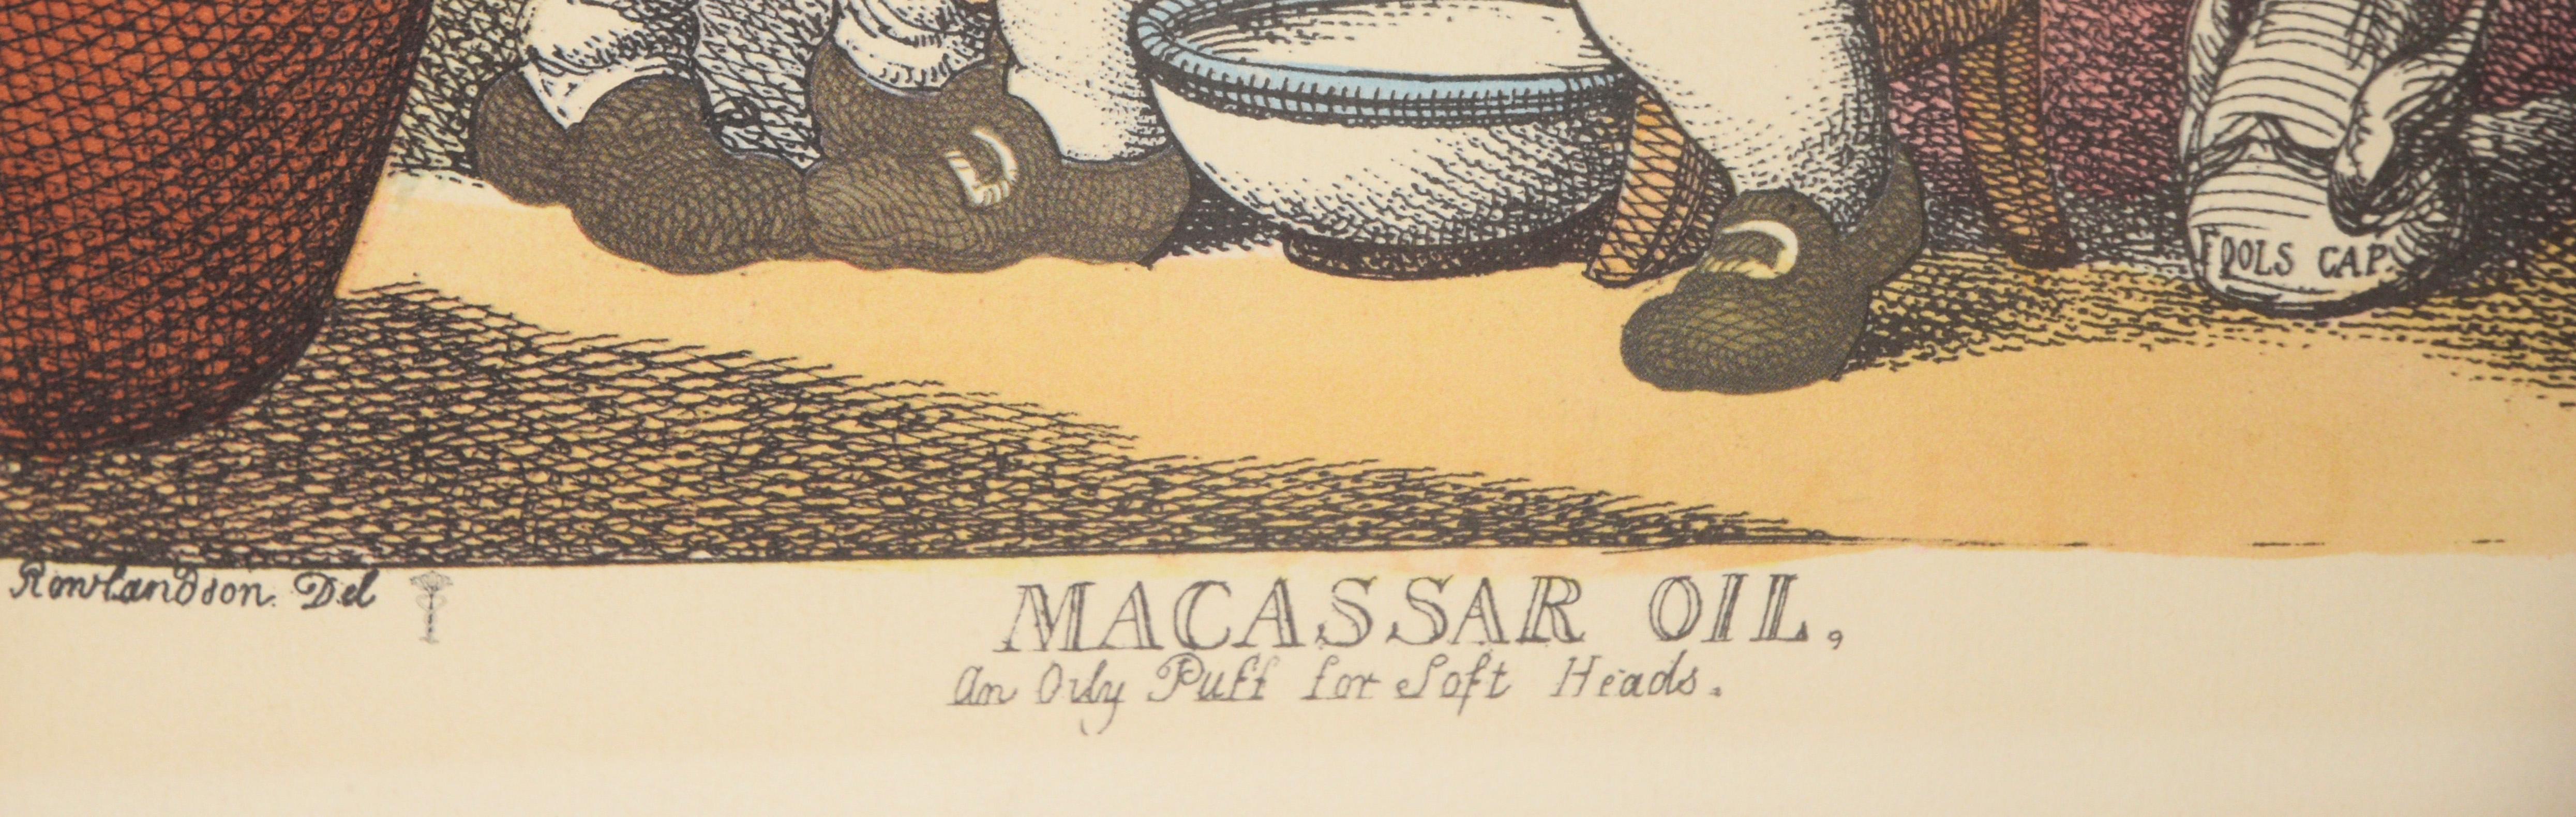 Paint Macassar Oil Cartoon Ad - 1971 Hand Colored Lithograph For Sale